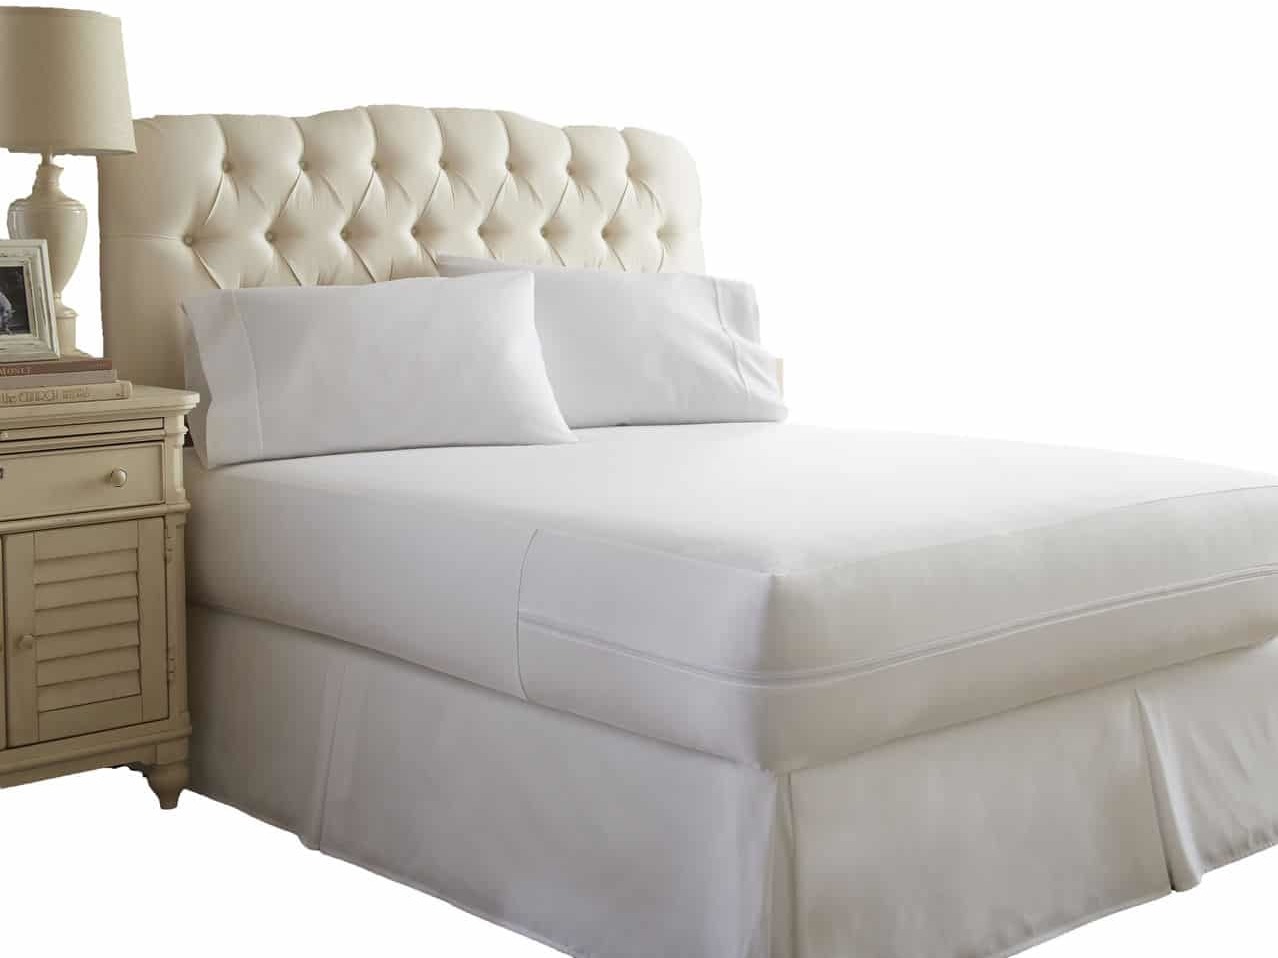 twinbed bug zippered mattress protector